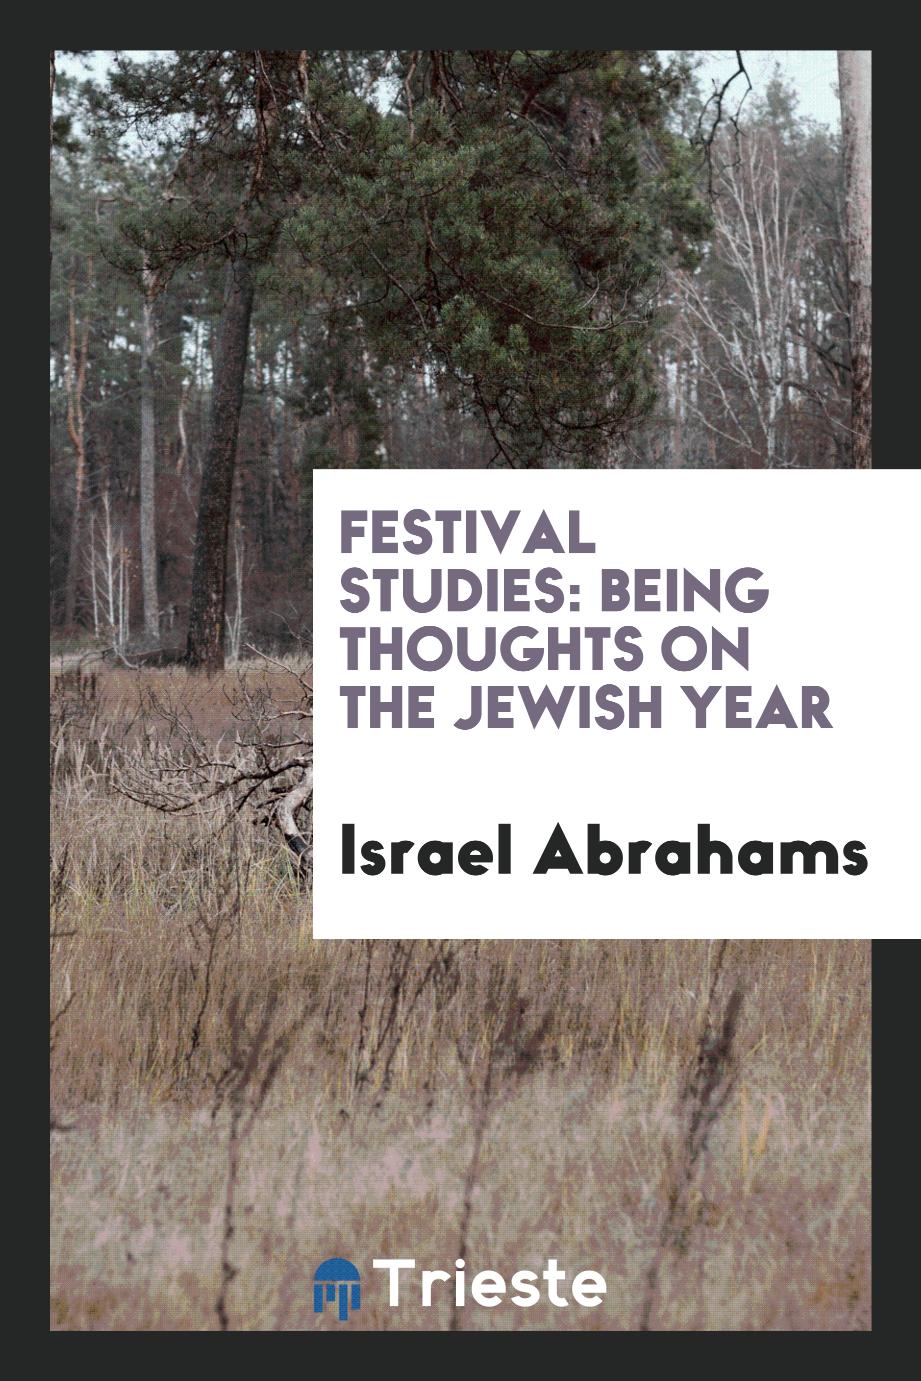 Festival Studies: Being Thoughts on the Jewish Year